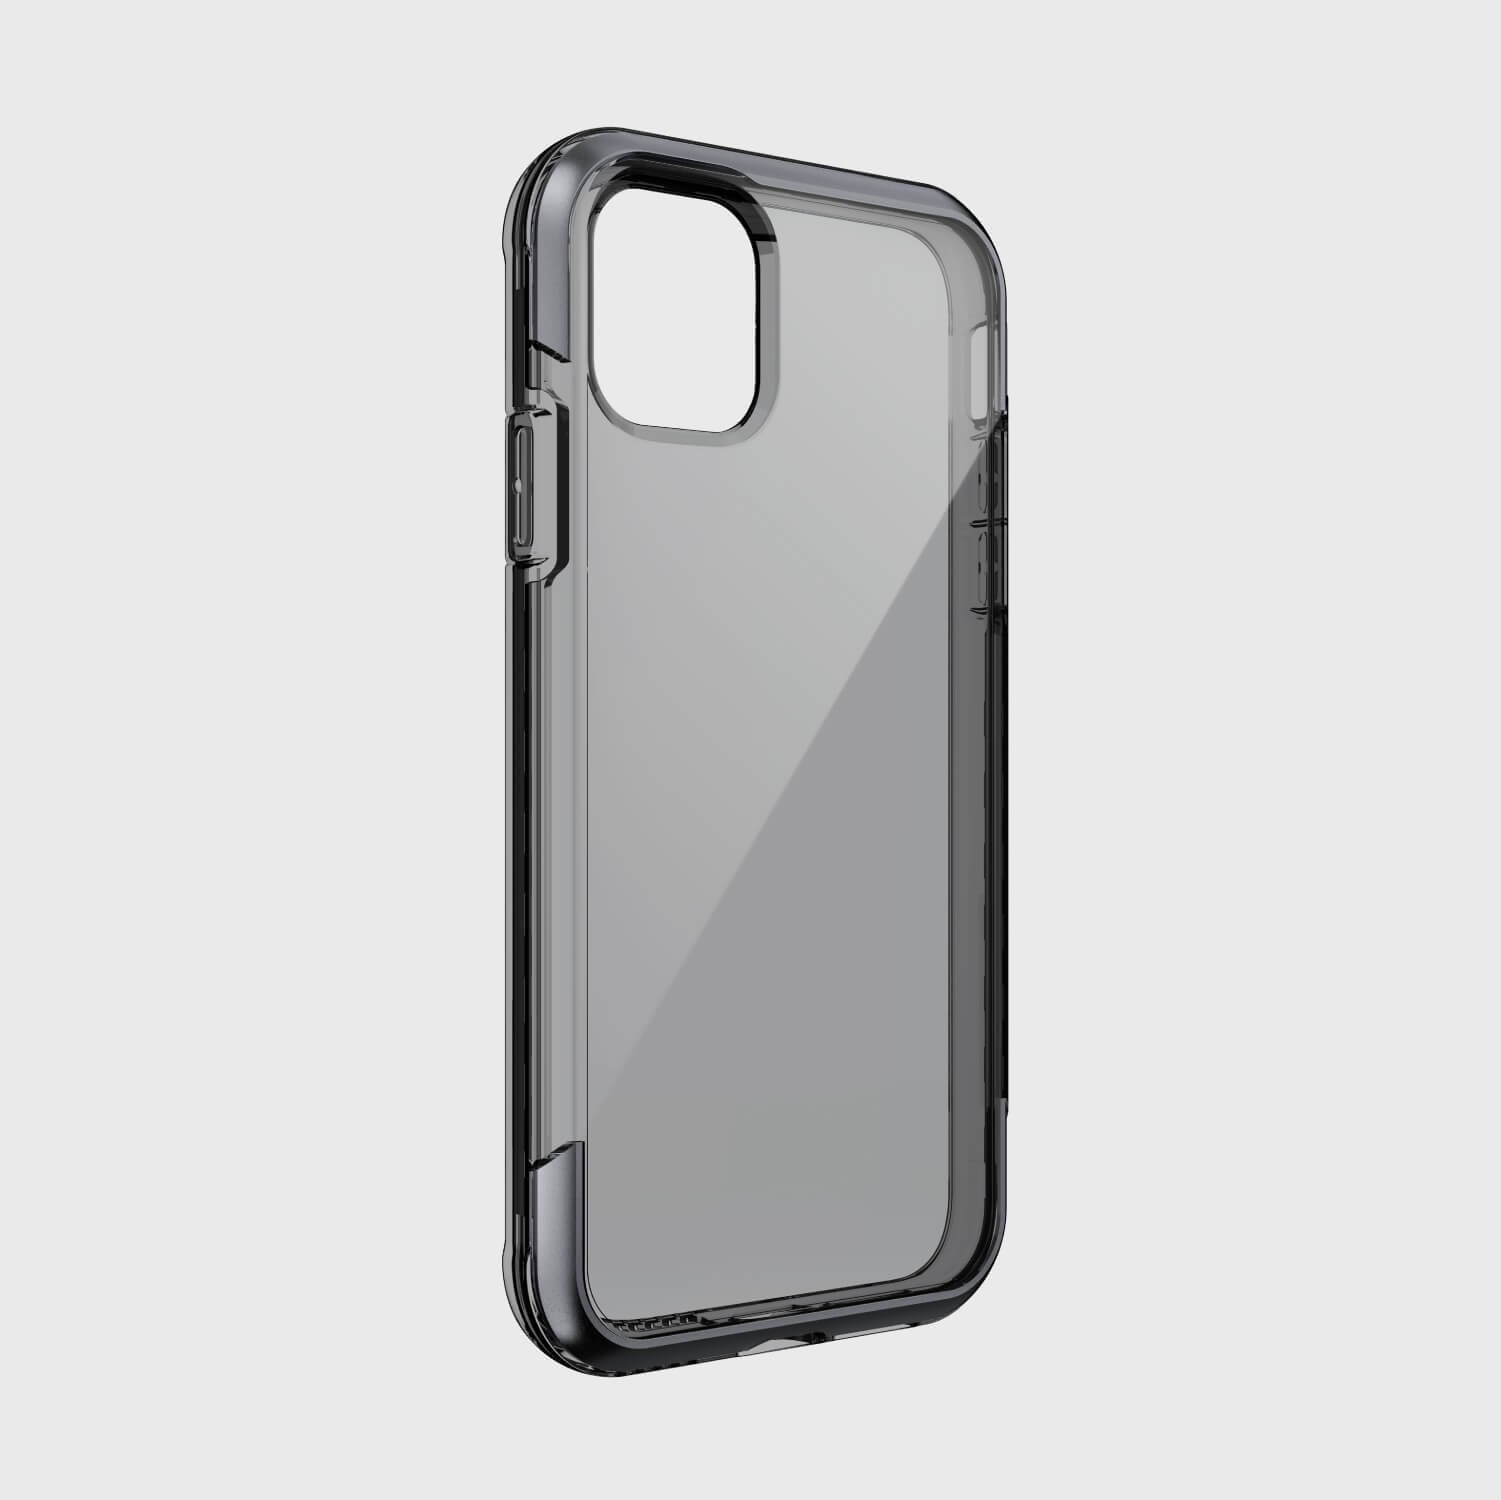 The Raptic AIR iPhone 11 Pro Max case offers 13 foot drop protection from the back view.